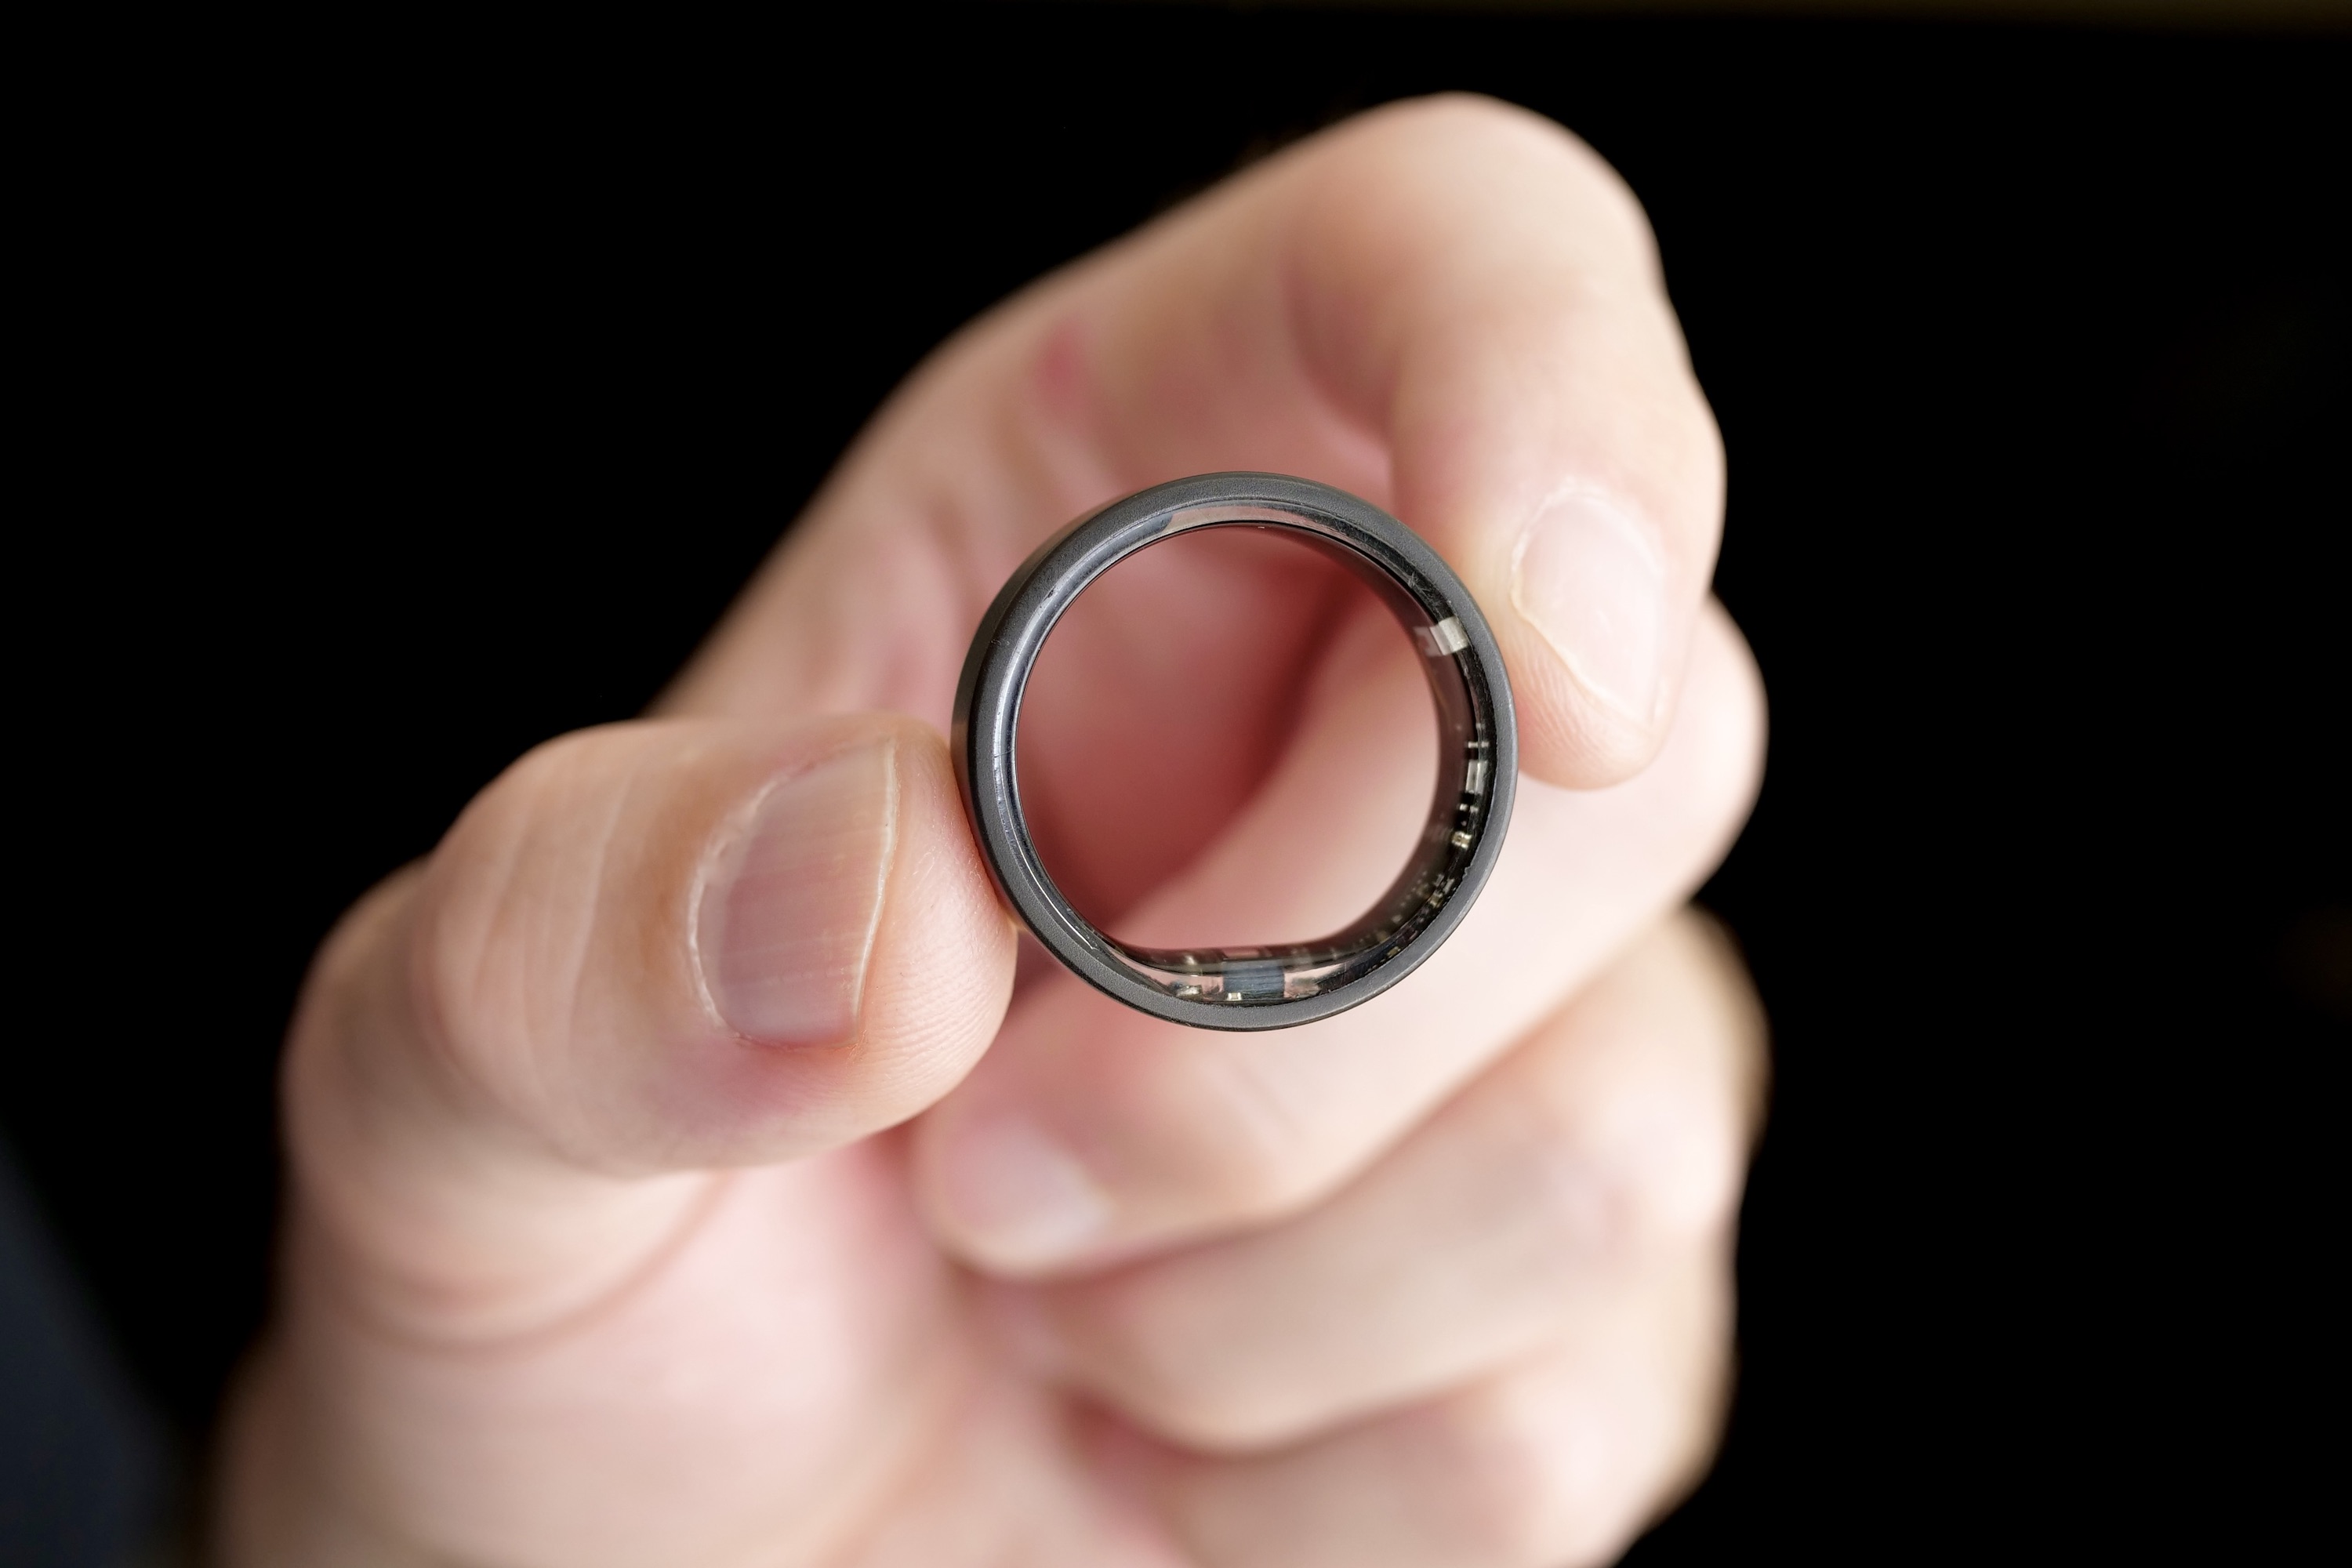 Why I can't wait for Apple to finally make a smart ring